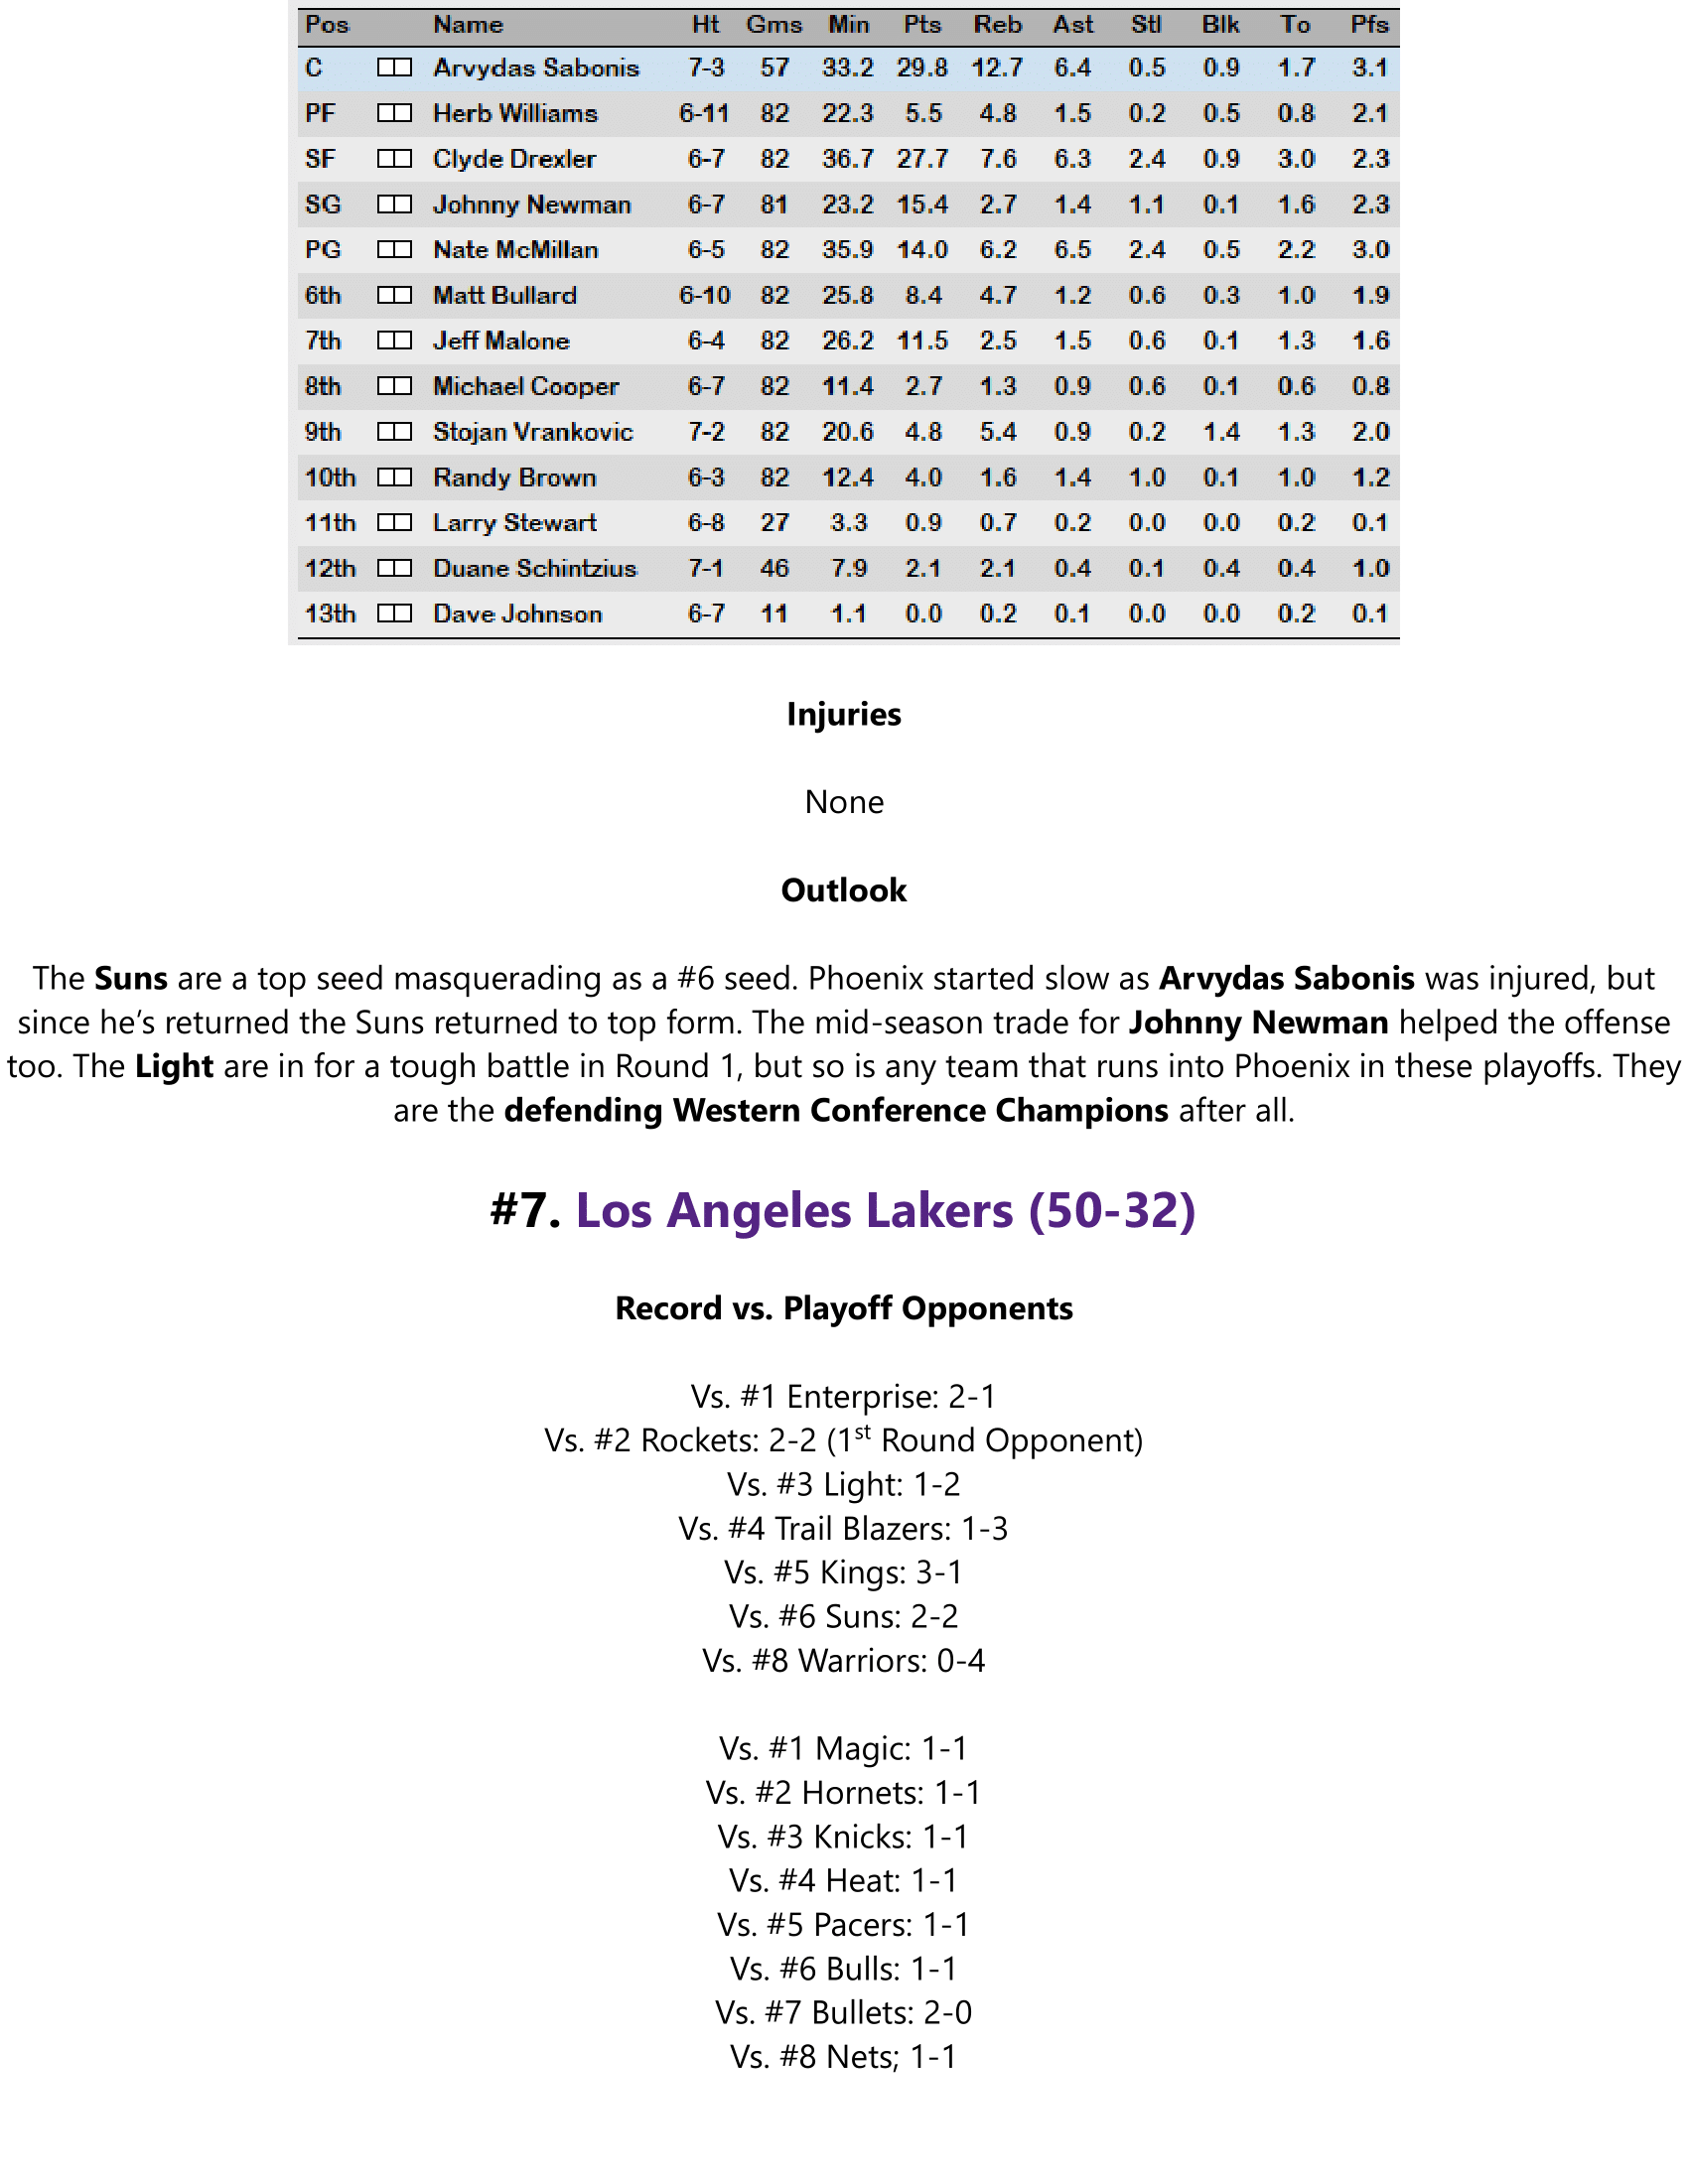 93-94-Part-4-Playoff-Preview-10.png